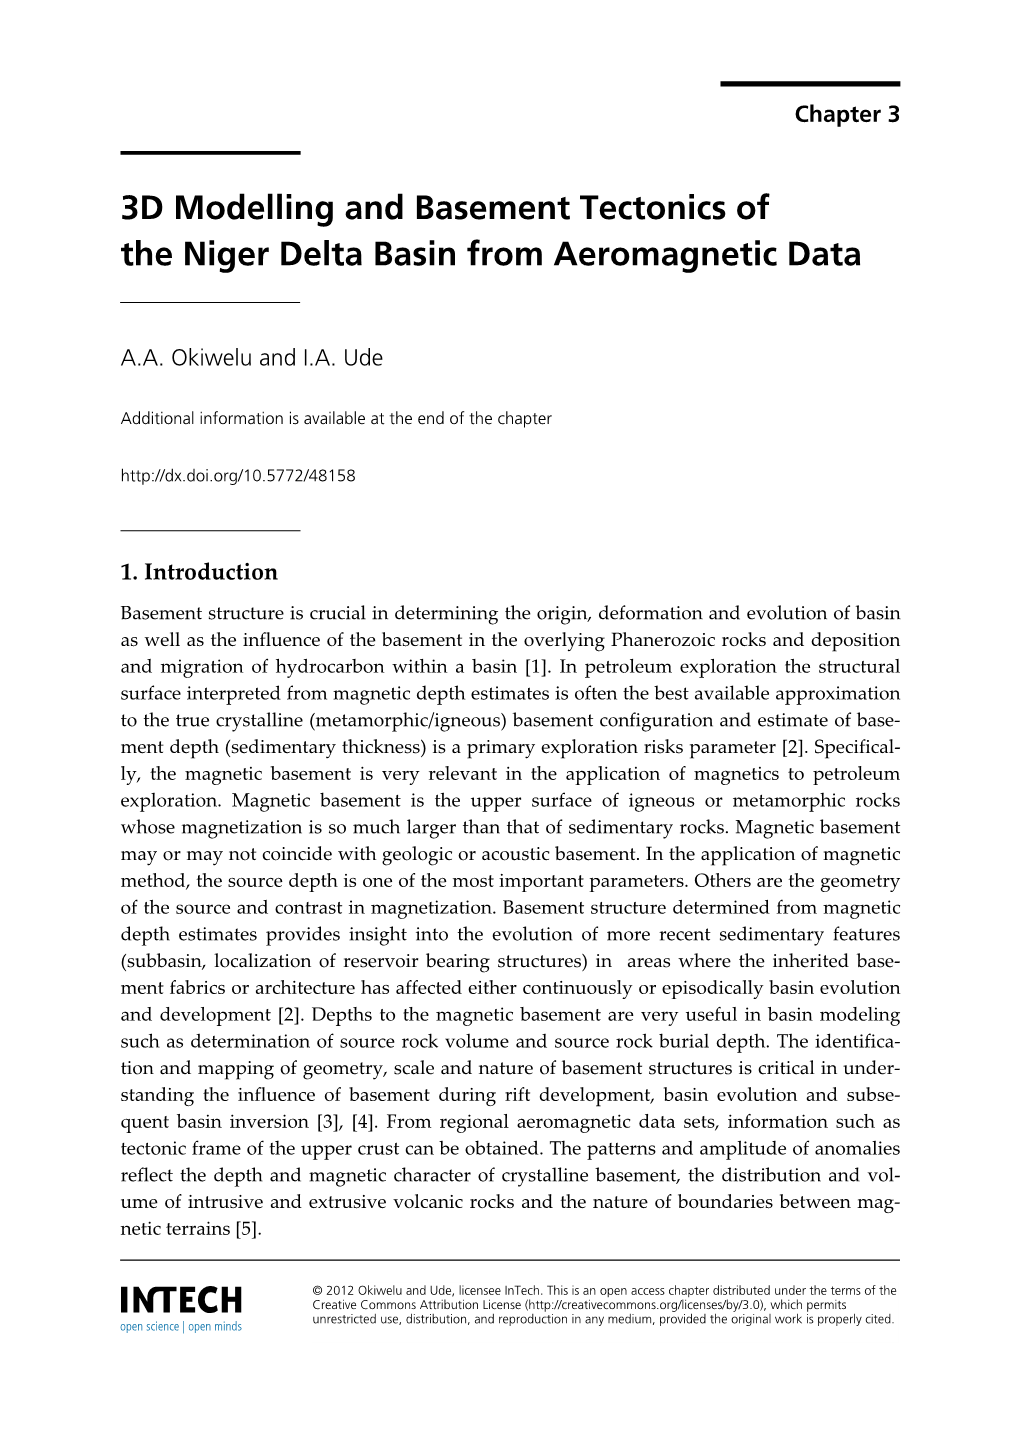 3D Modelling and Basement Tectonics of the Niger Delta Basin from Aeromagnetic Data